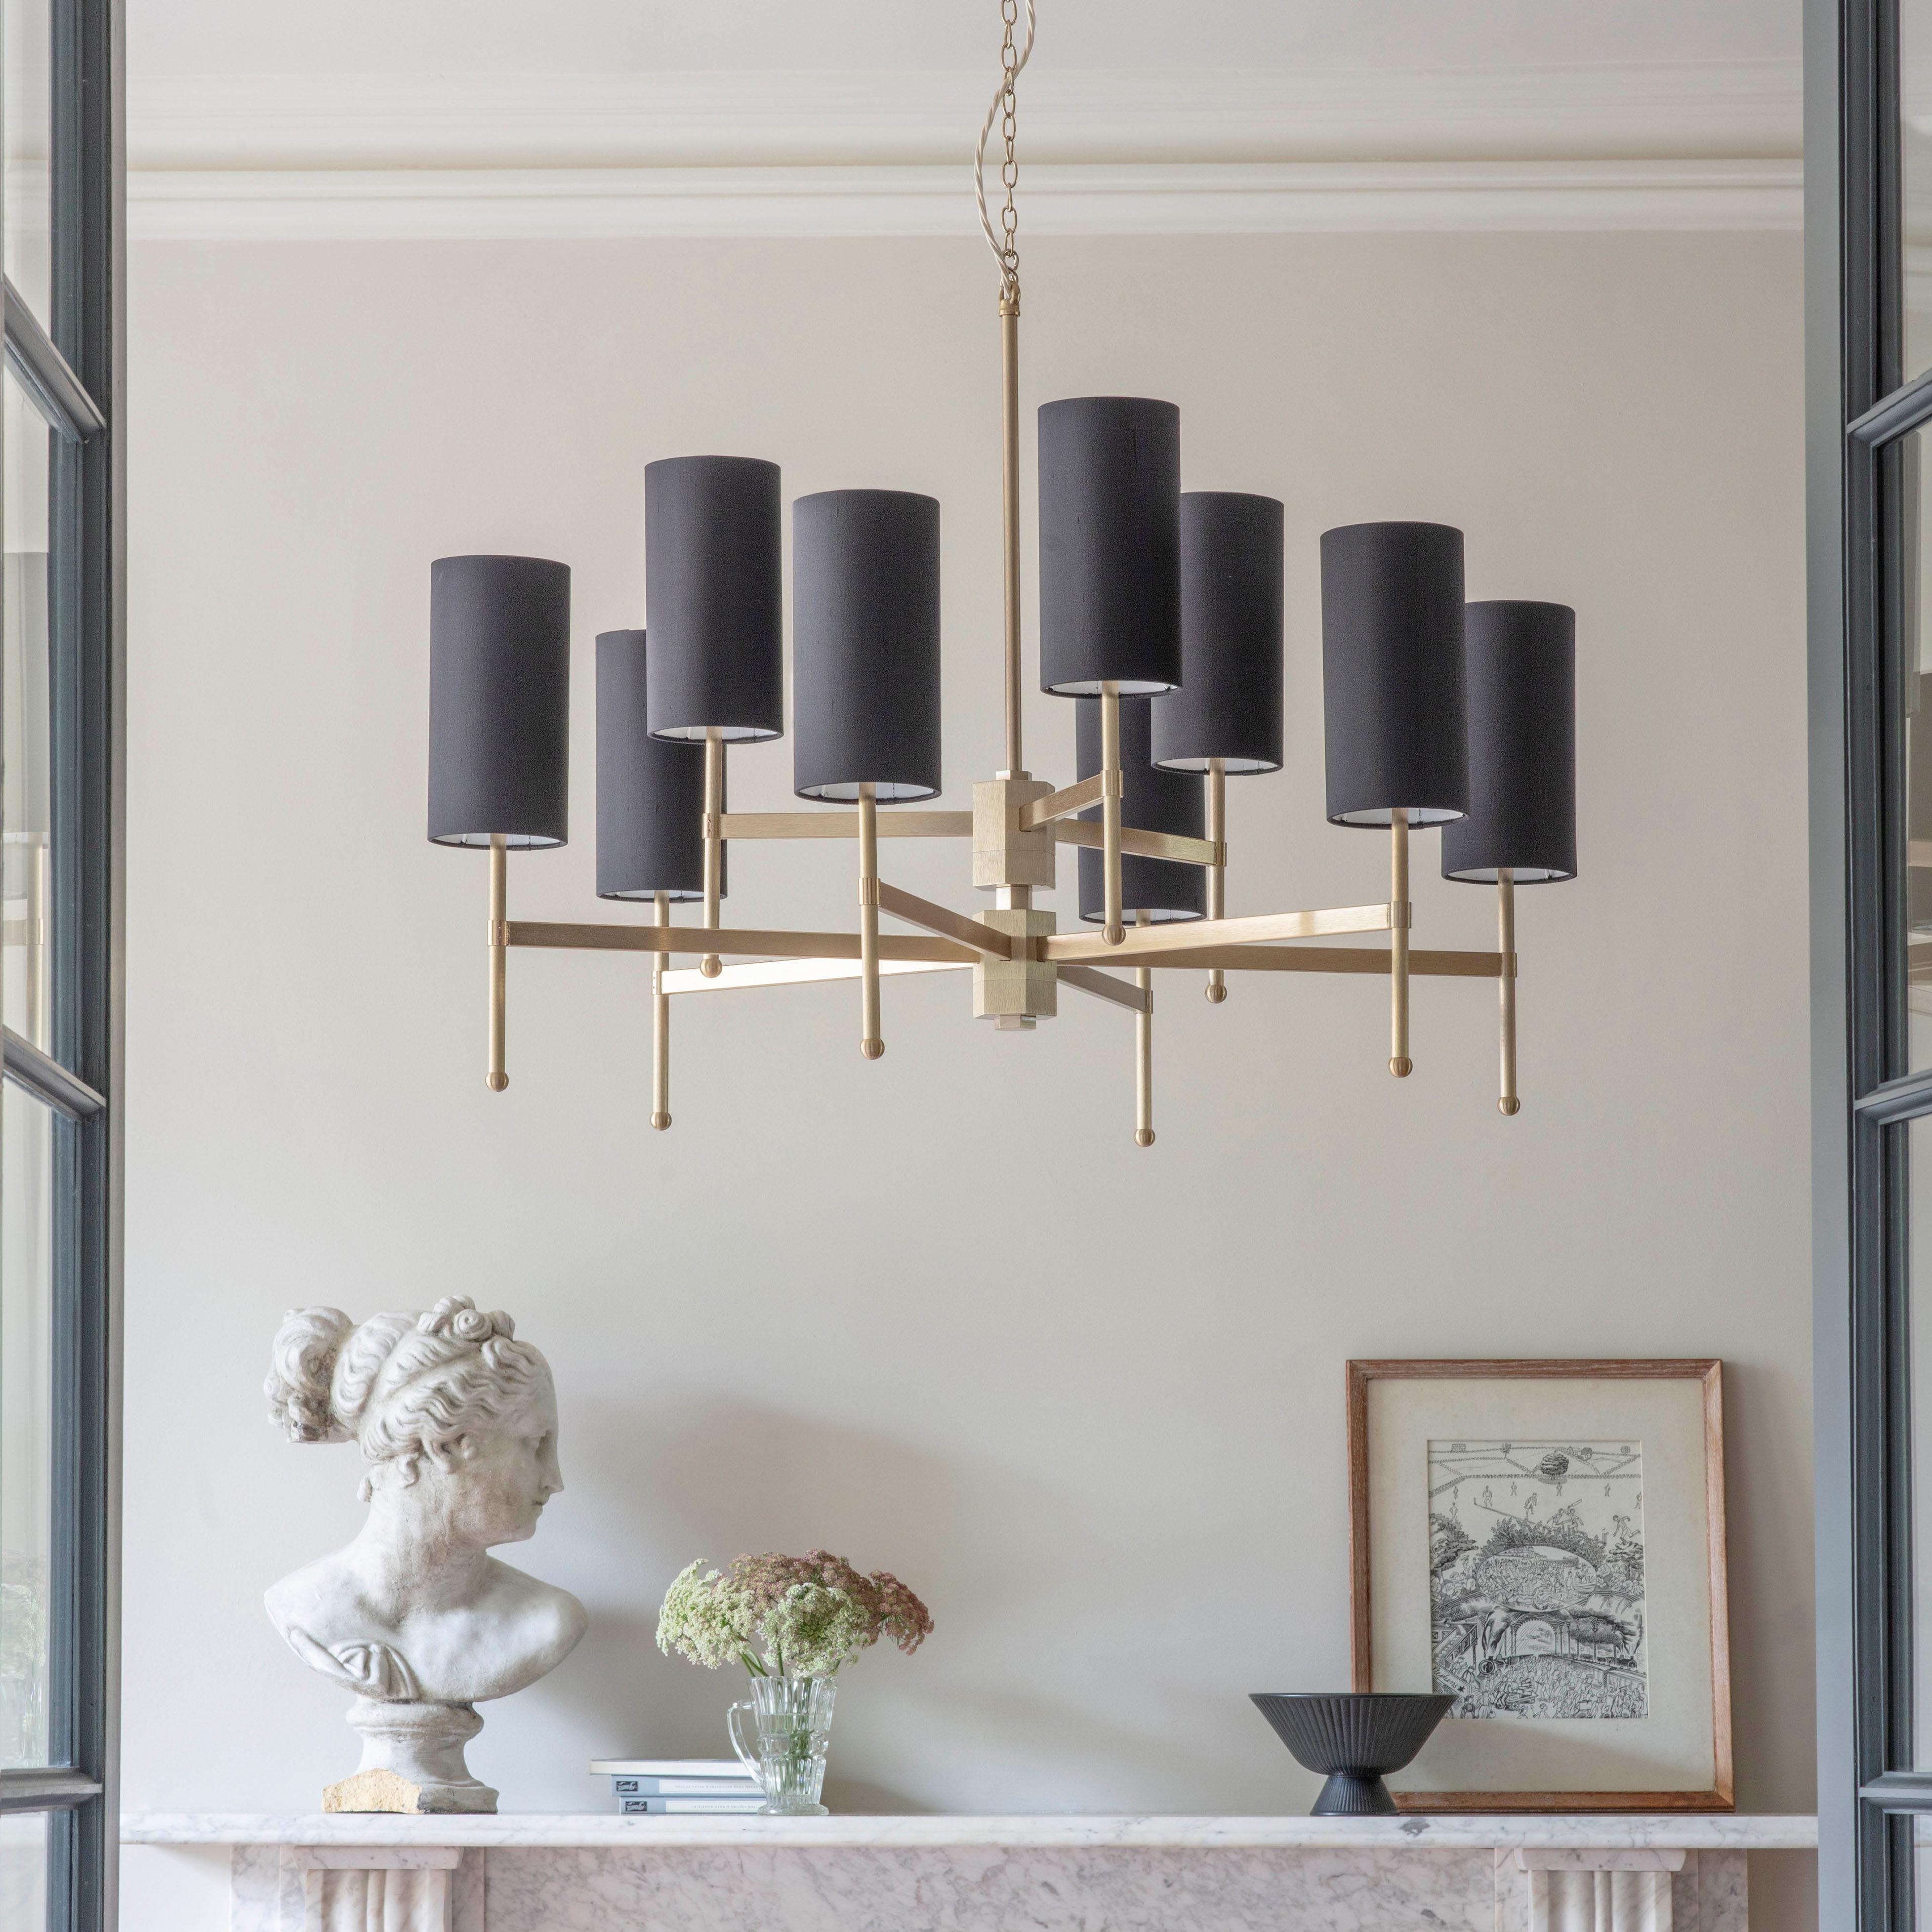 An elegant midcentury chandelier featuring a handcrafted metal stem frame, supporting beautiful silk douppion shades. The hand-grained Bronze metalwork is perfectly balanced by the richness of silk shades. 

Designed and handmade by Tigermoth